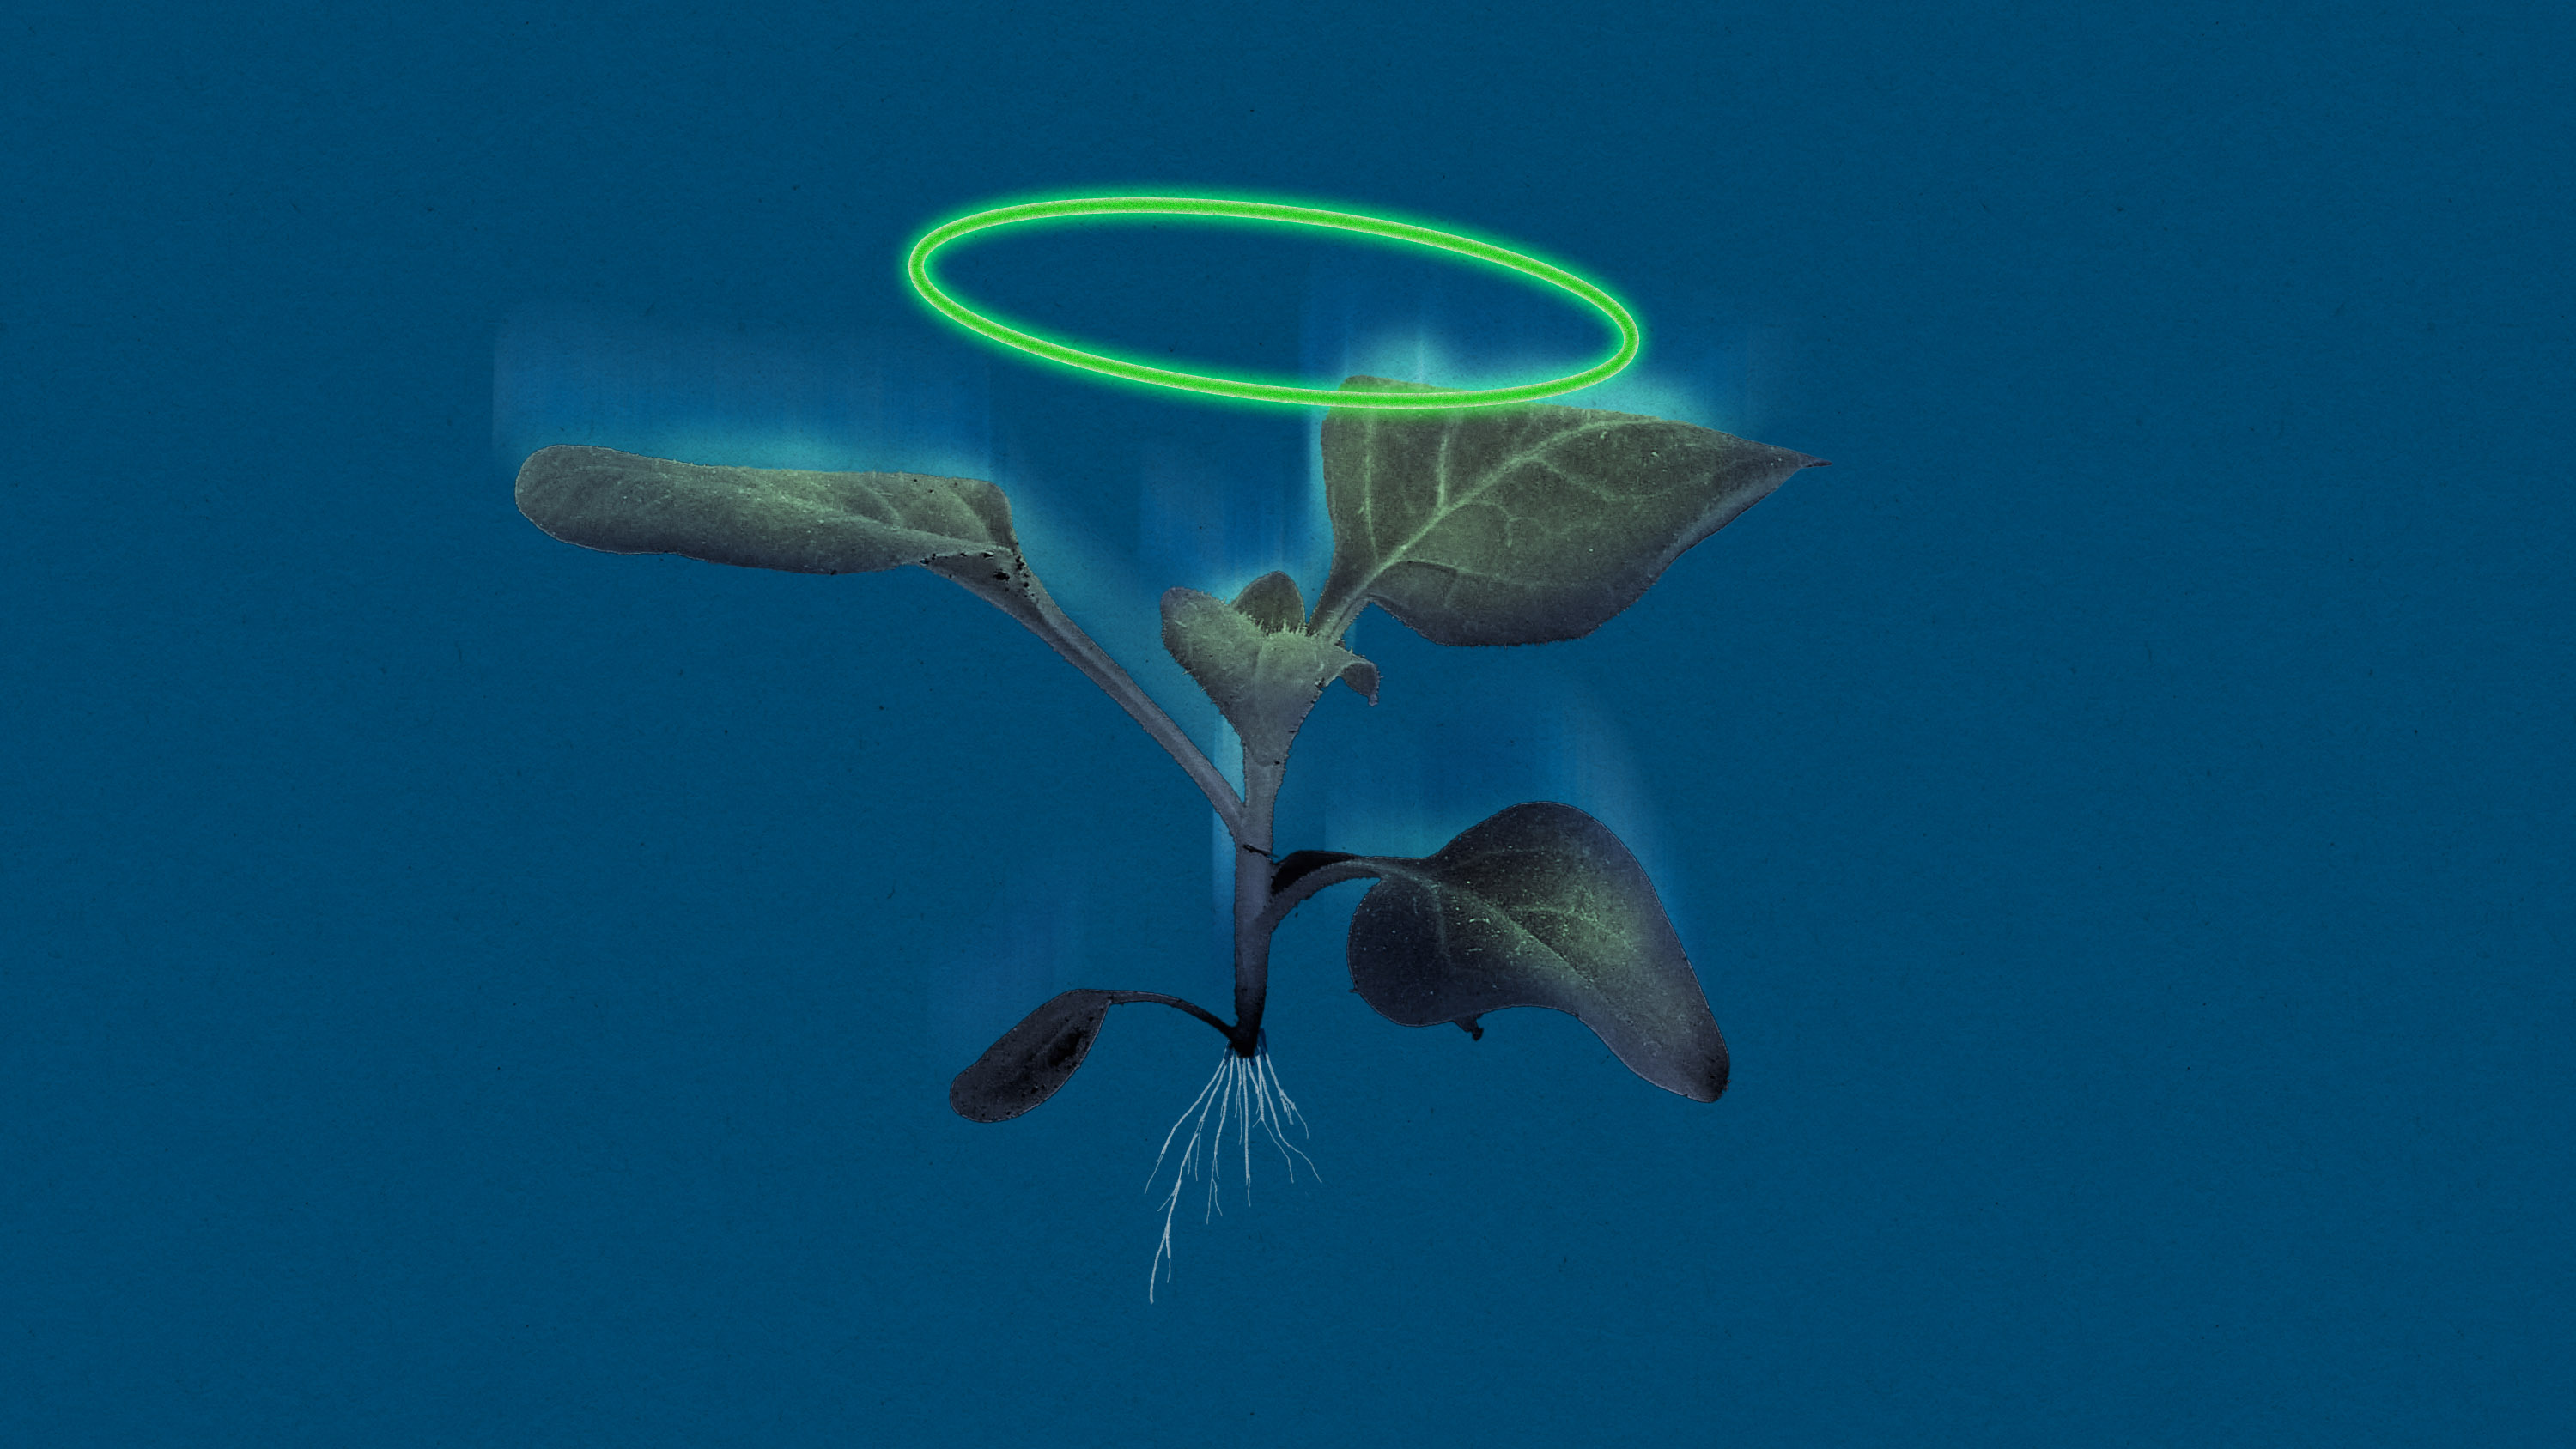 a seedling floating with a halo and its spirit leaving it